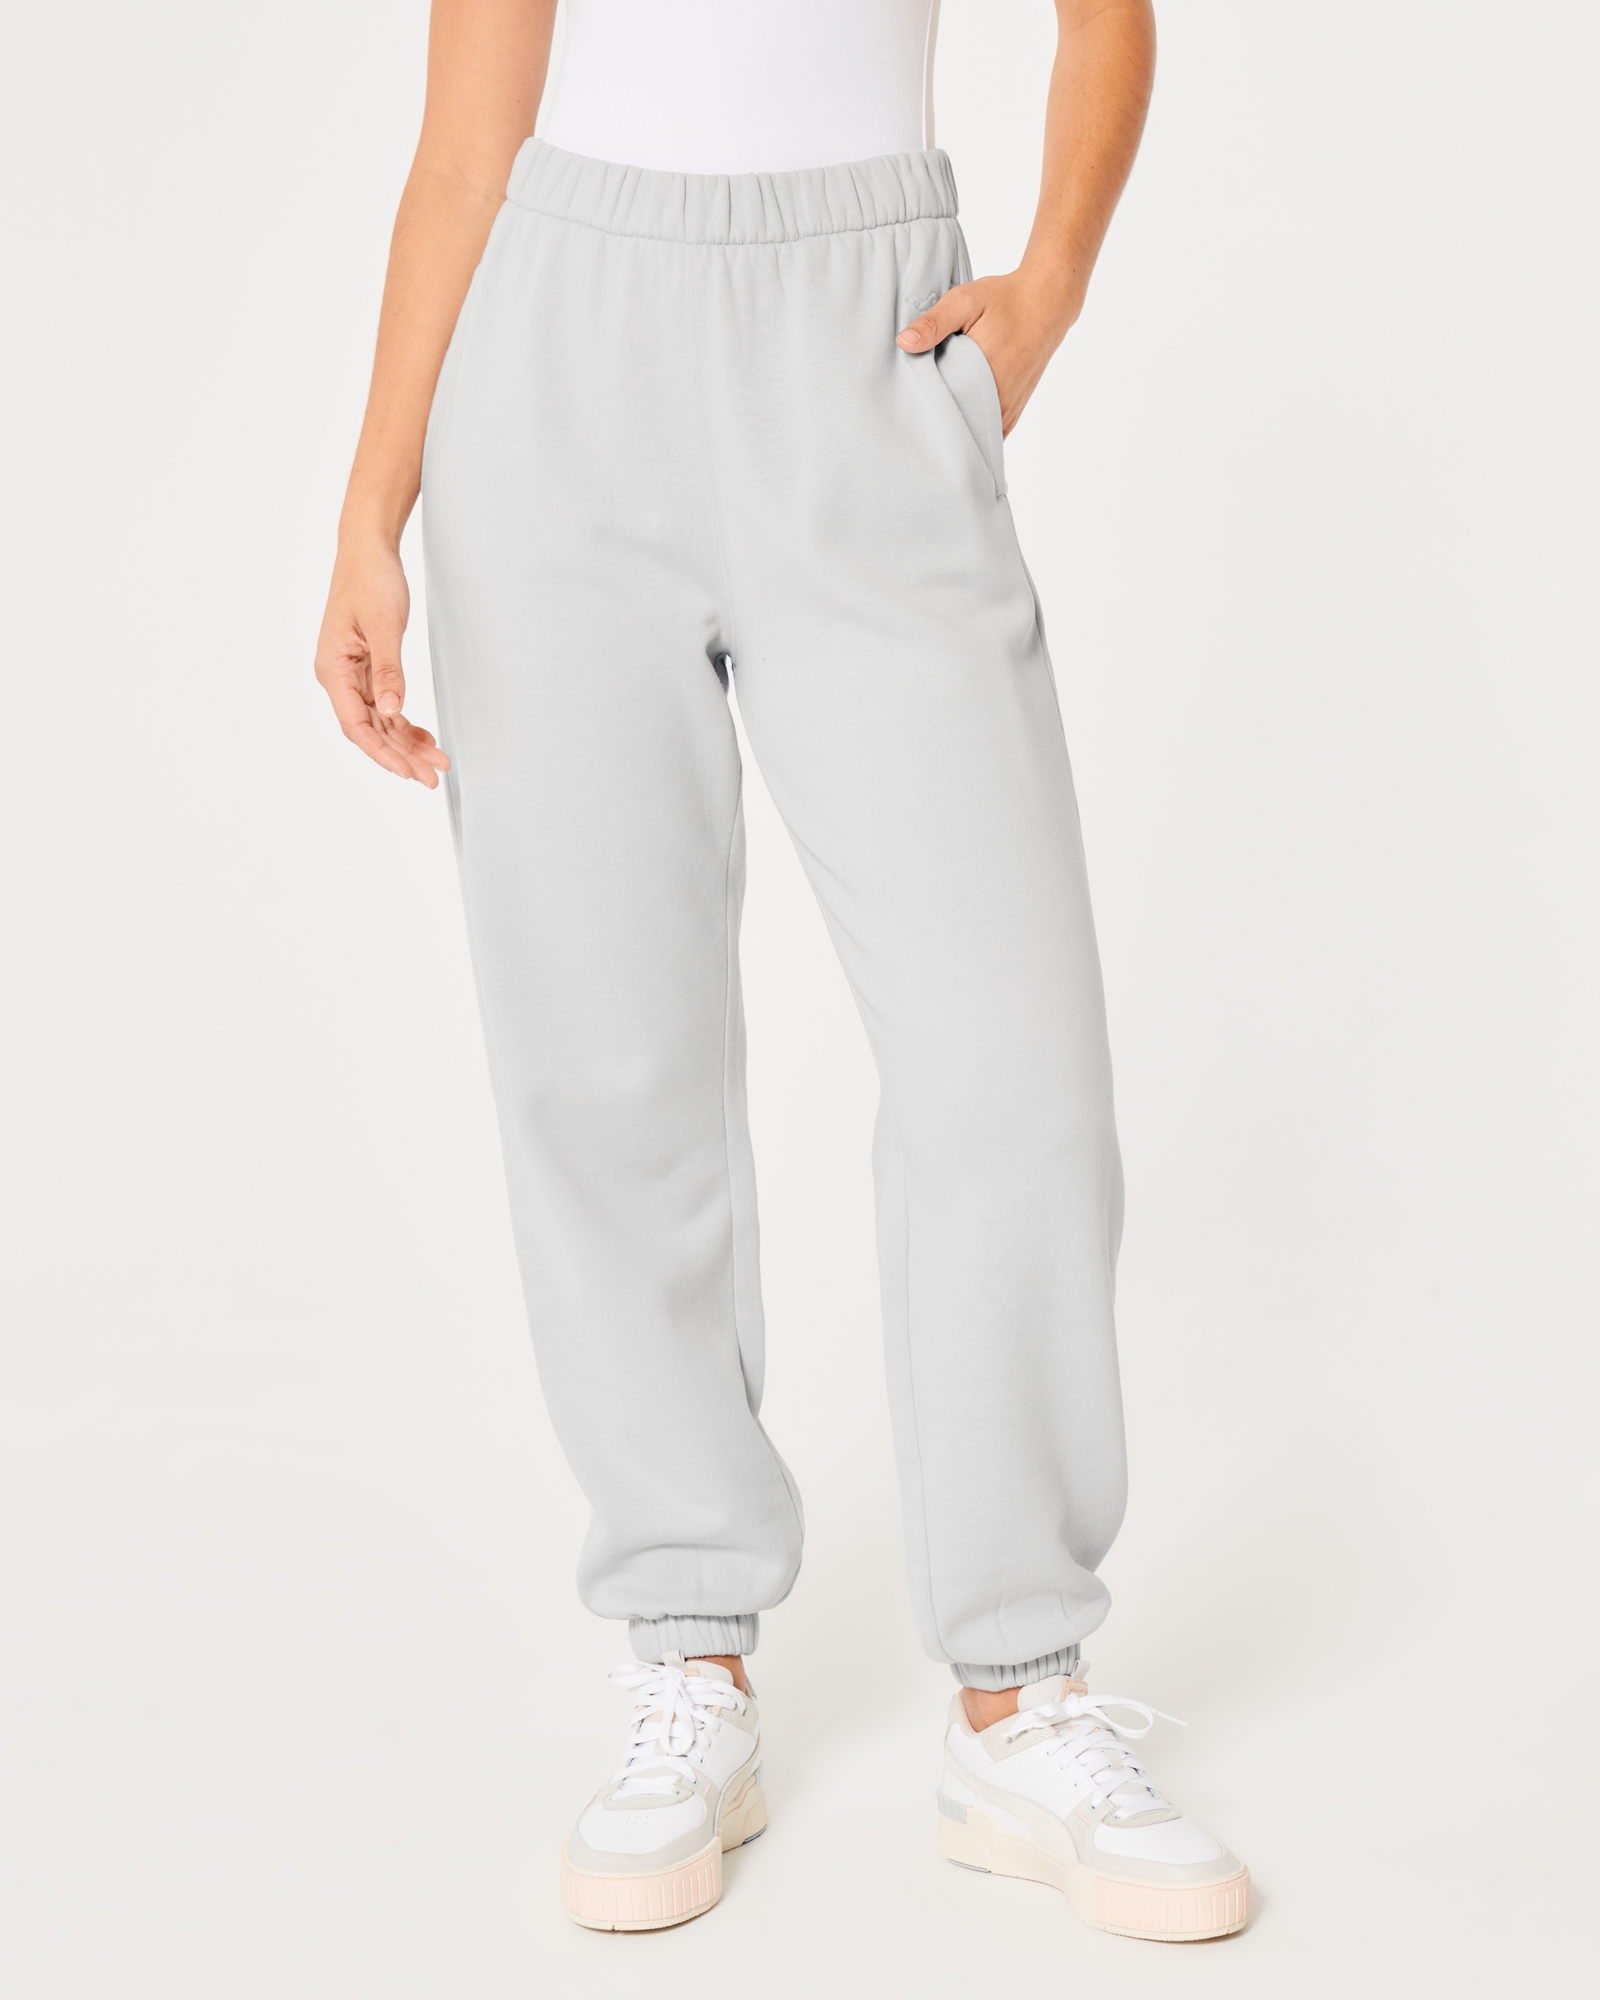 https://img.hollisterco.com/is/image/anf/KIC_347-3056-0891-111_model2.jpg?policy=product-extra-large